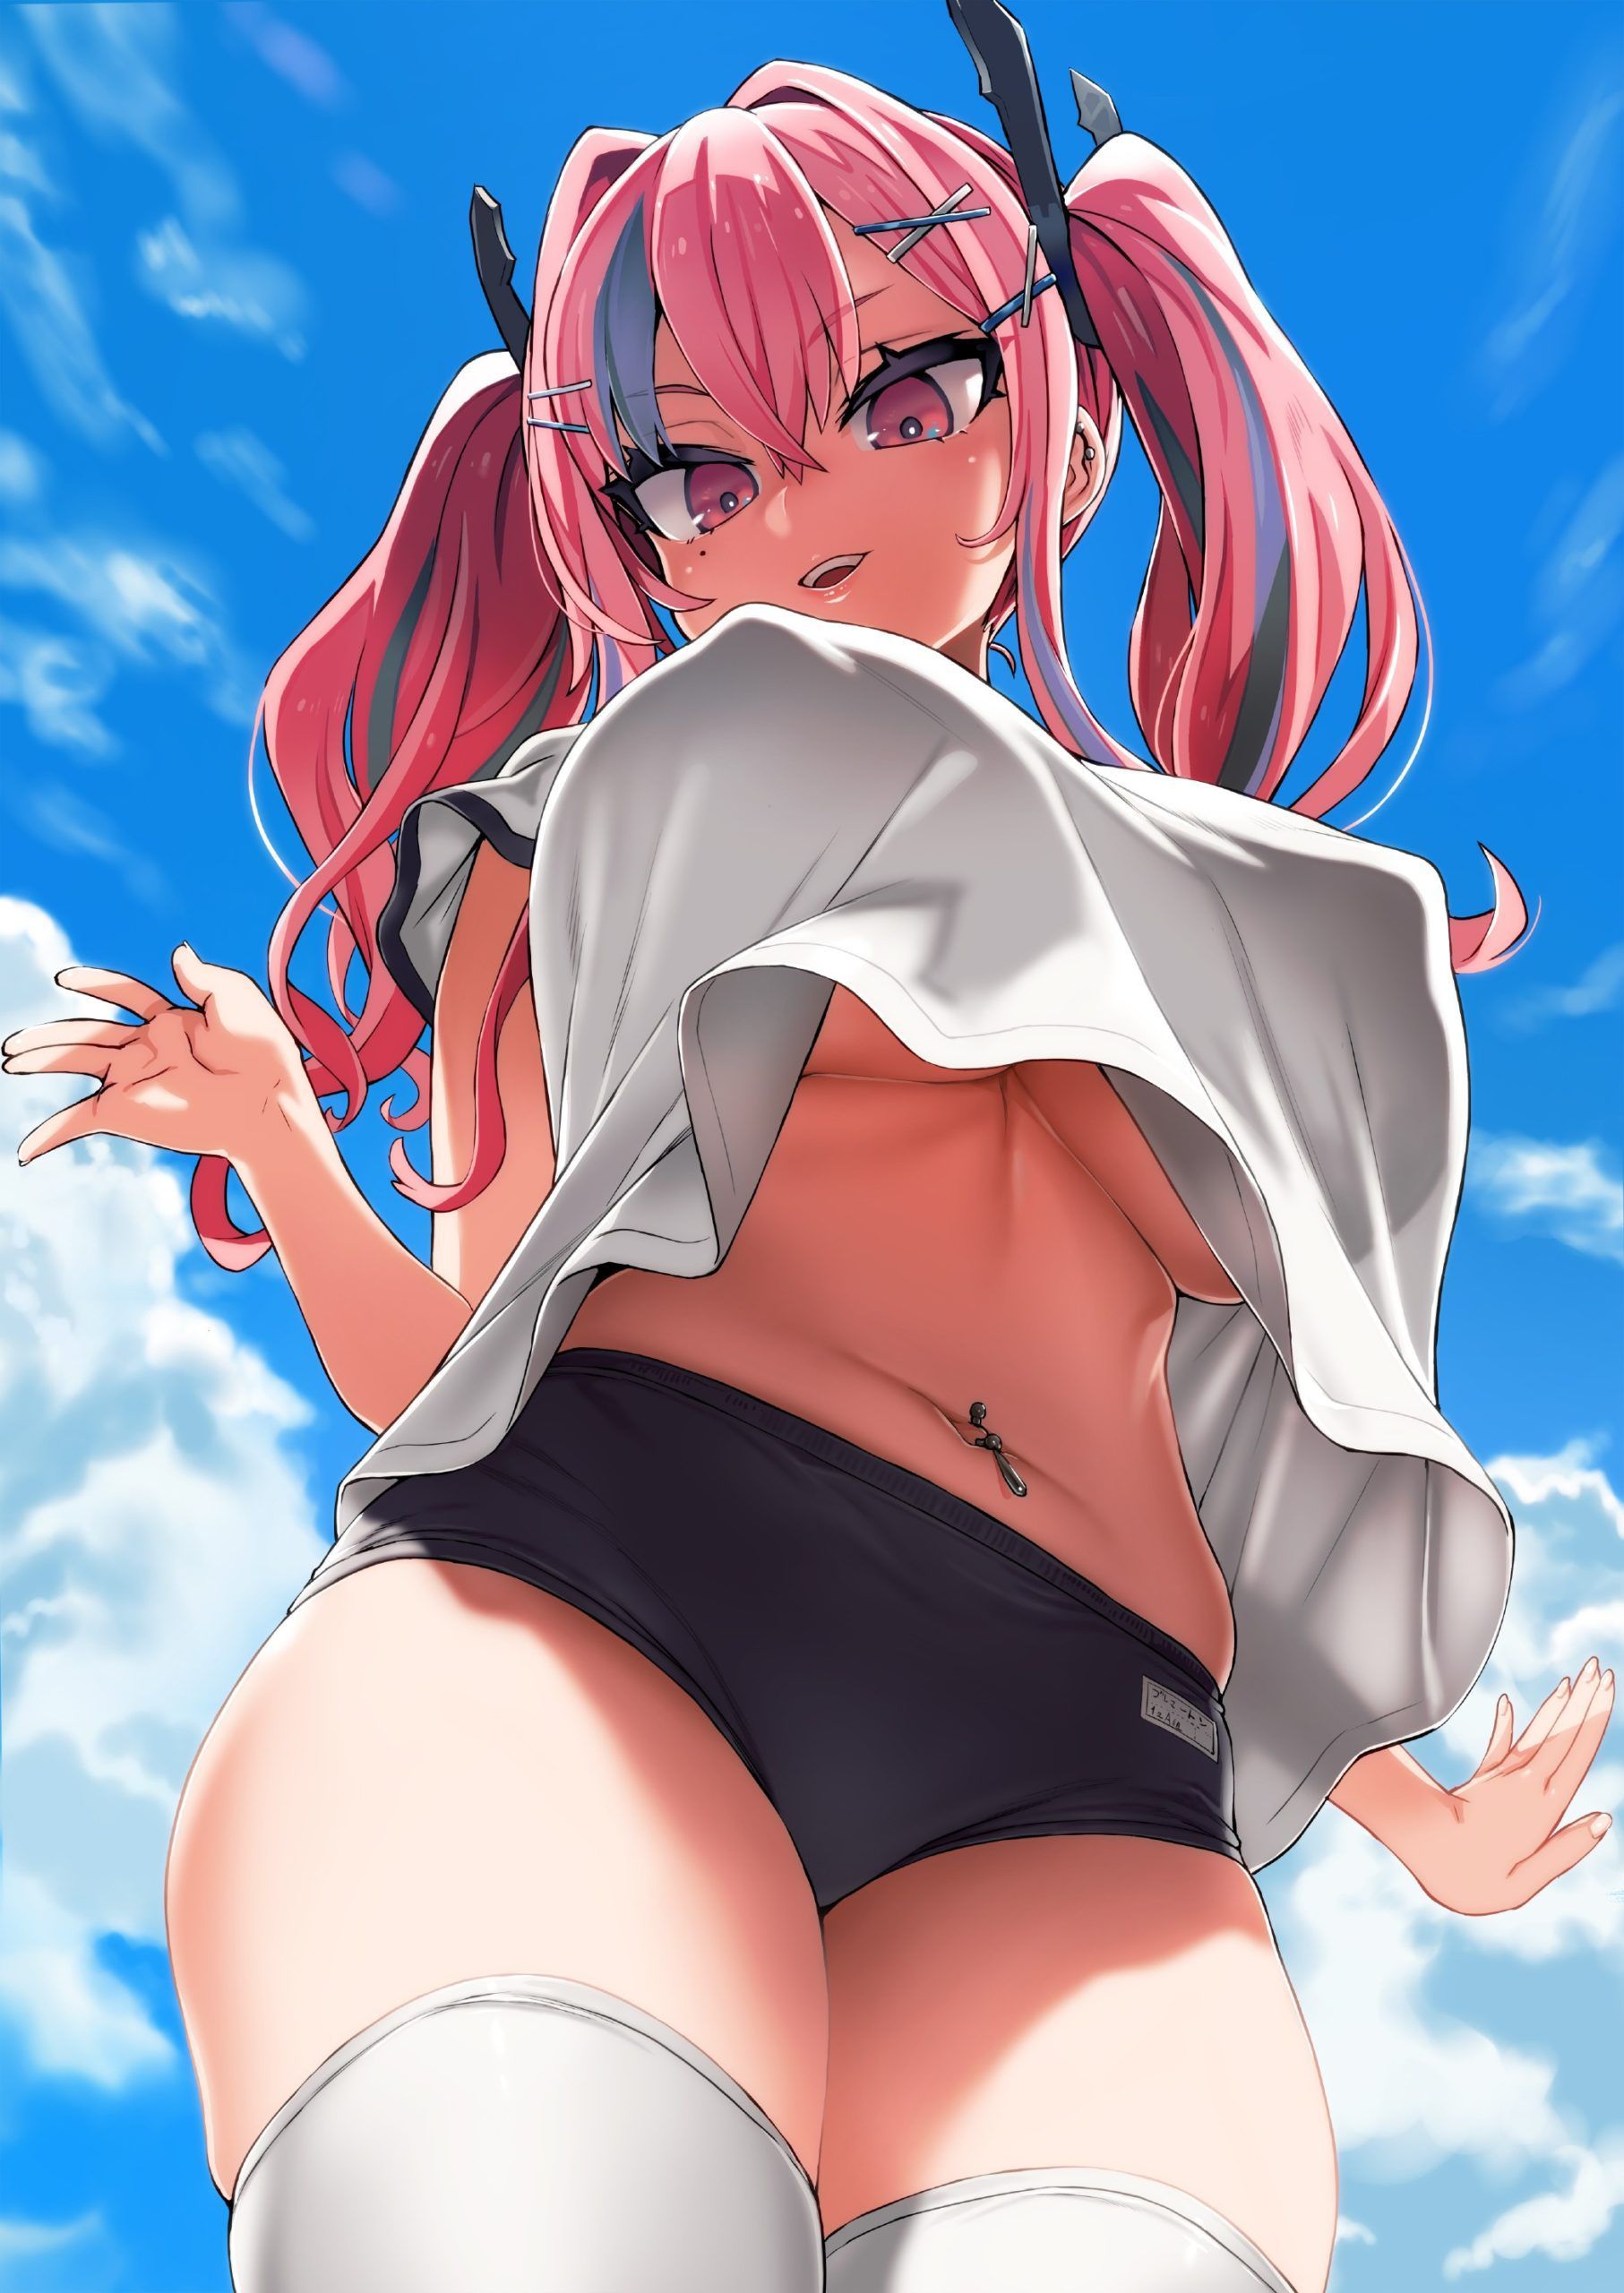 Bremerton-chan of Azur Lane seems to be erotic cute with big, so let's check together w 6